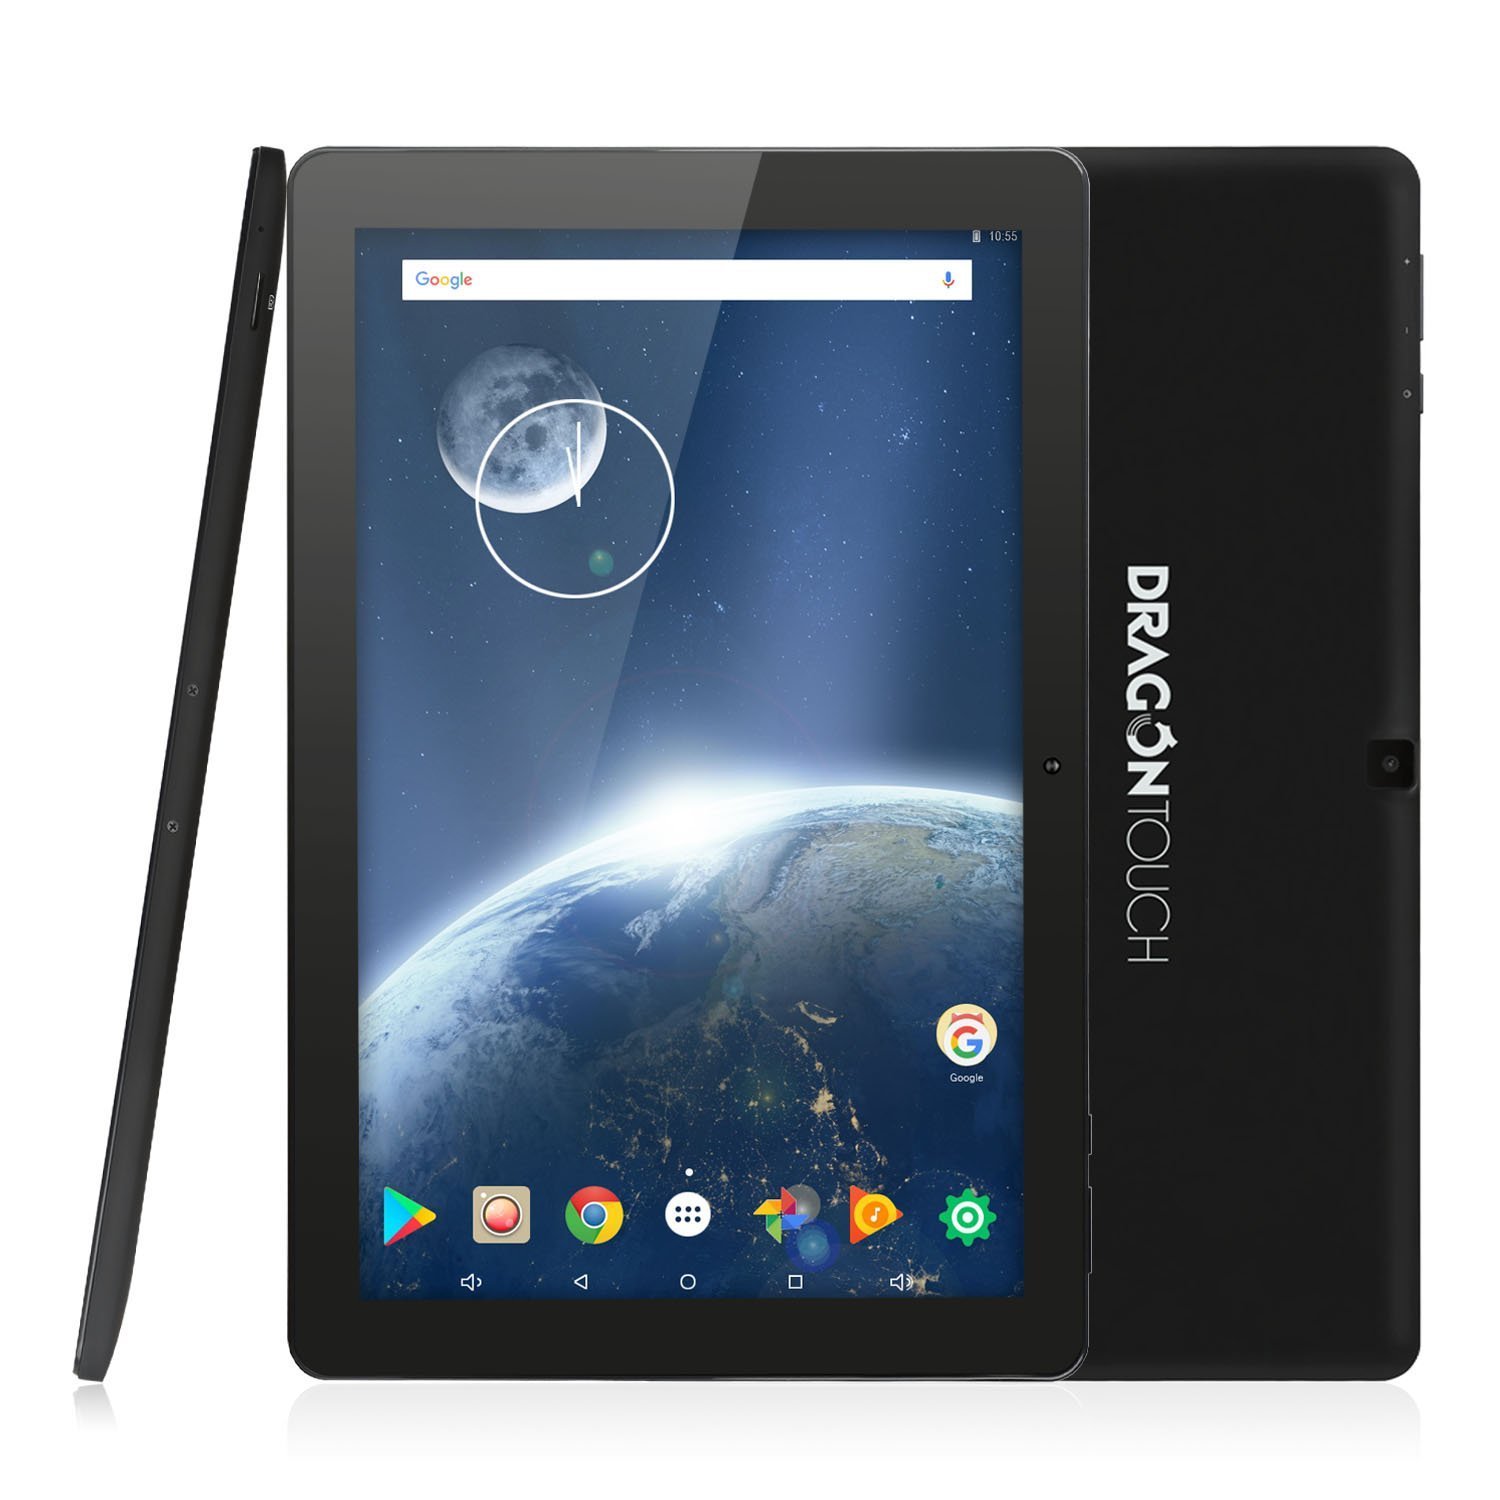 Android 4.0 download for tablet